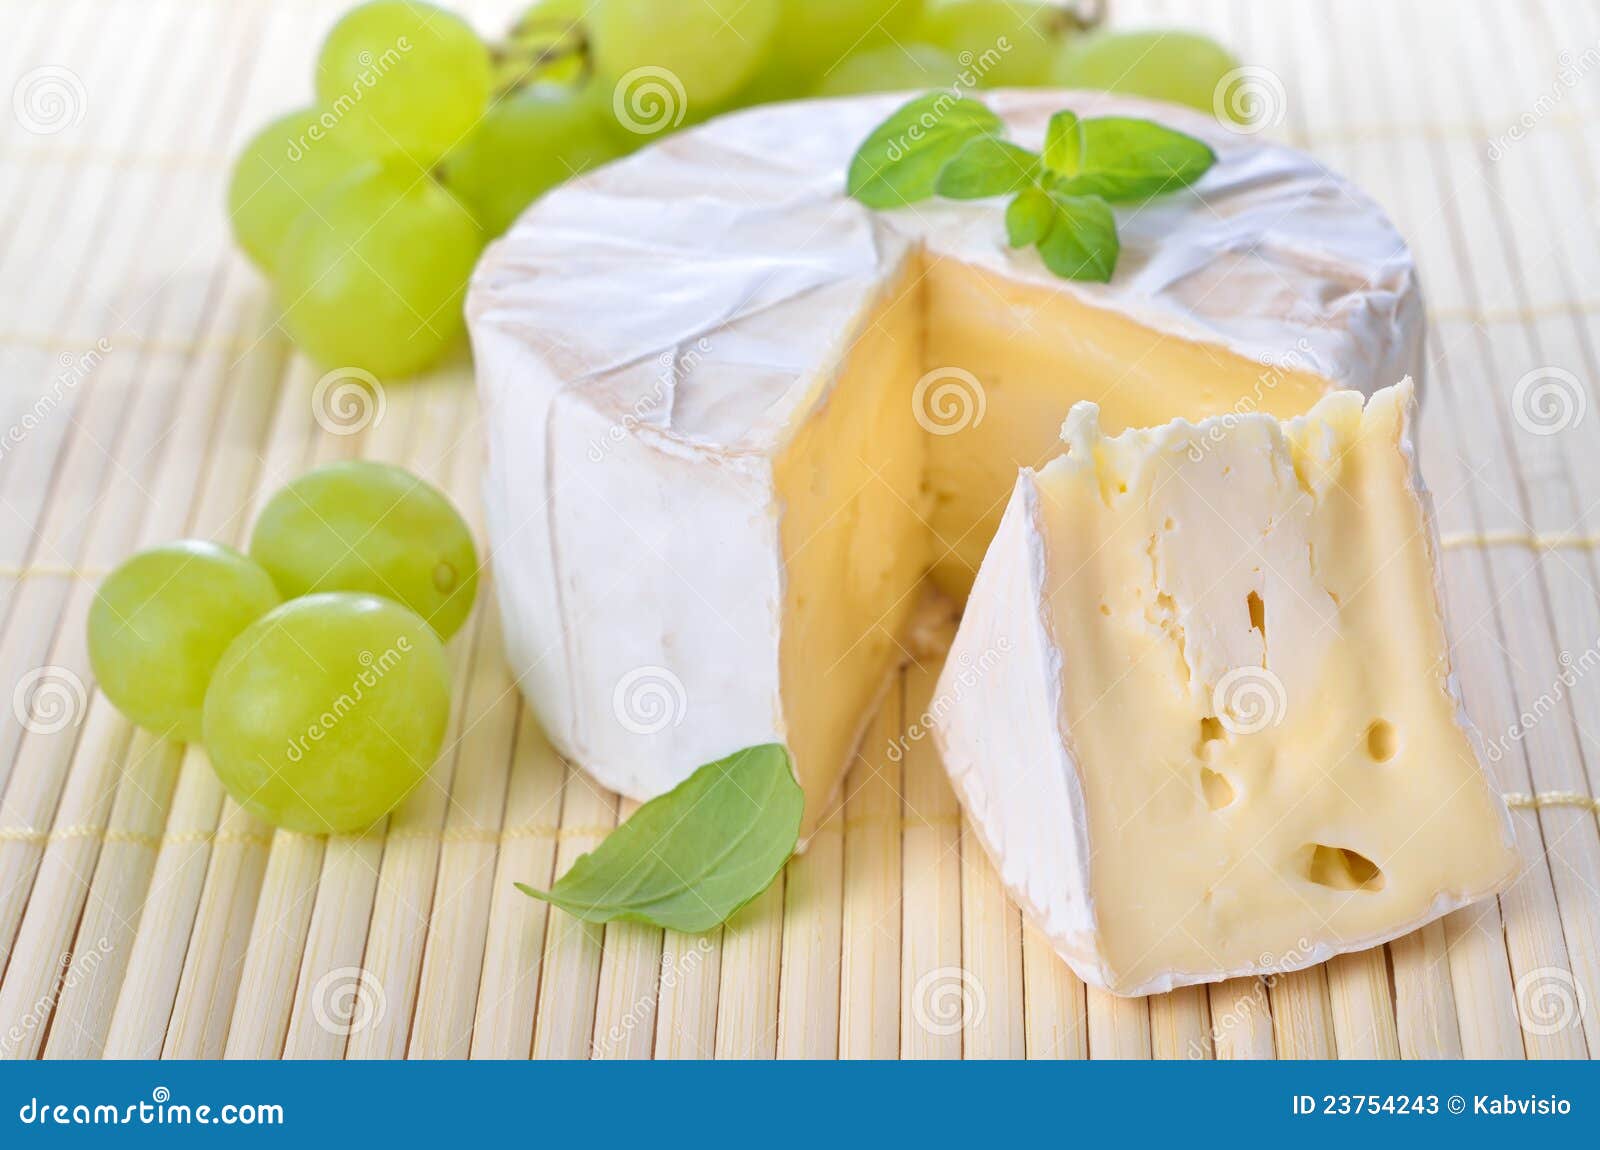 Soft cheese stock image. Image of green, product, food - 23754243